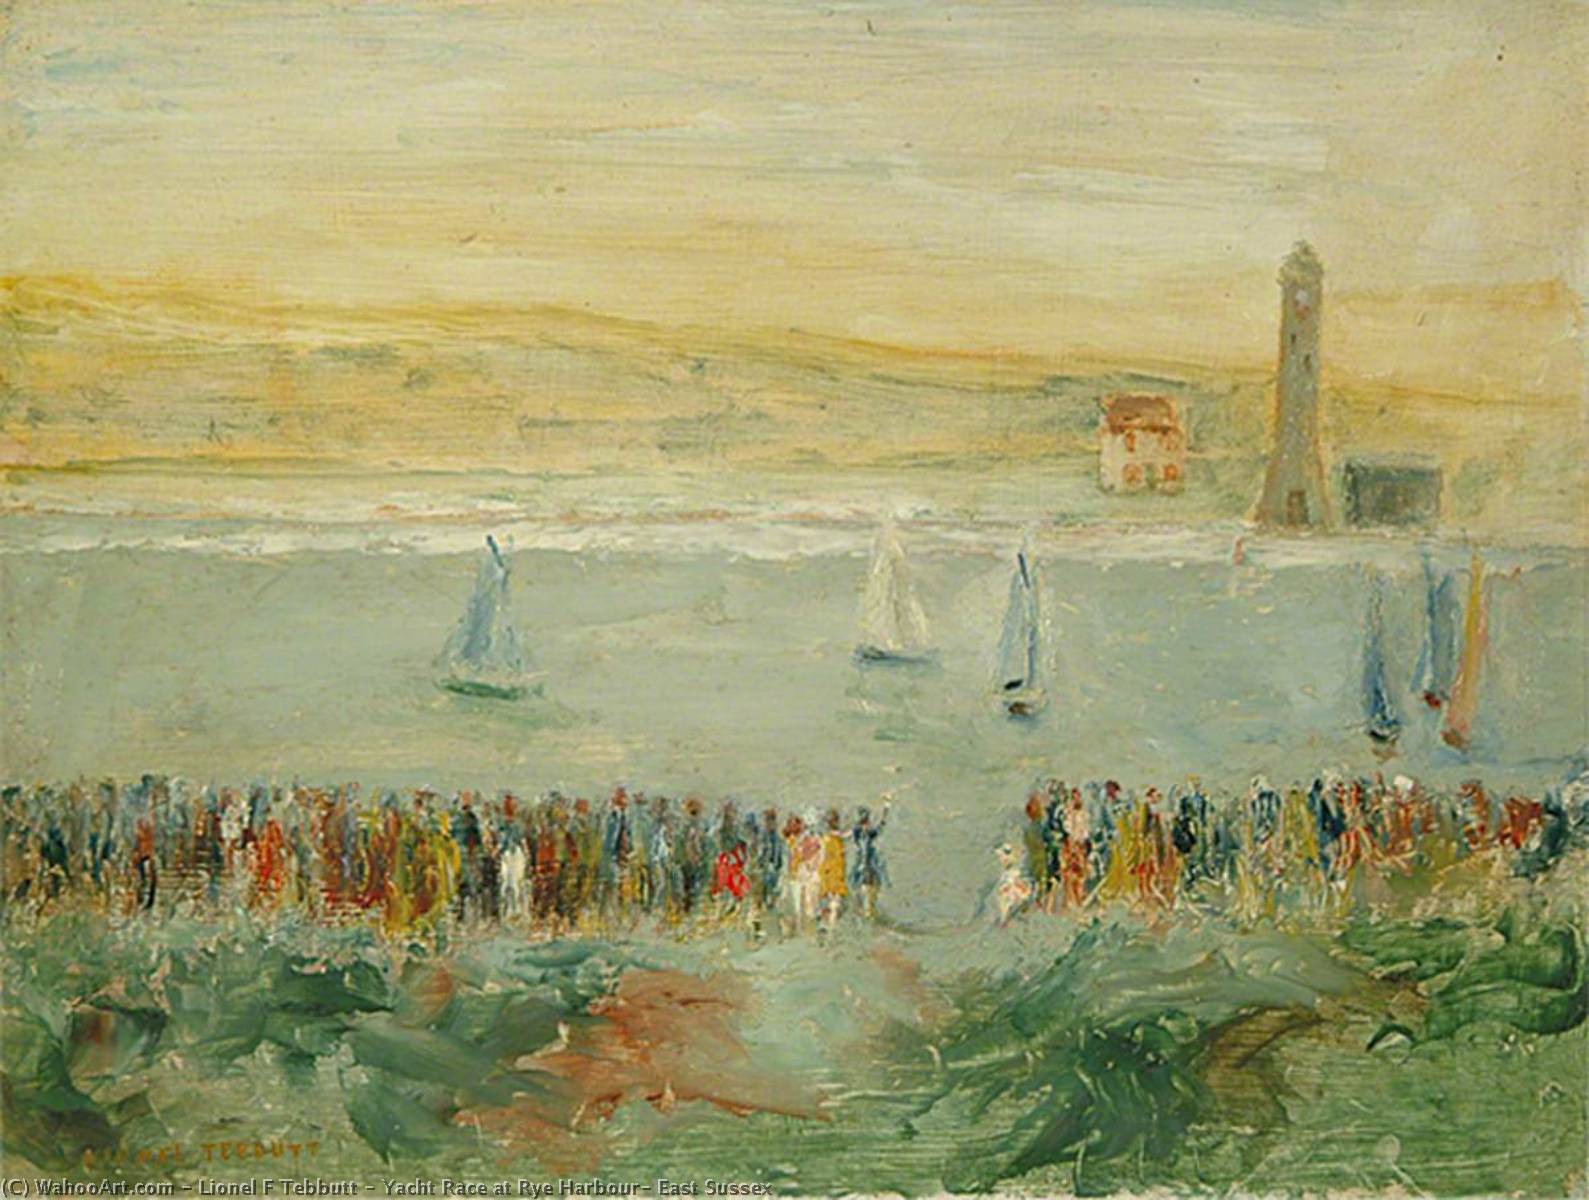 WikiOO.org - Encyclopedia of Fine Arts - Malba, Artwork Lionel F Tebbutt - Yacht Race at Rye Harbour, East Sussex